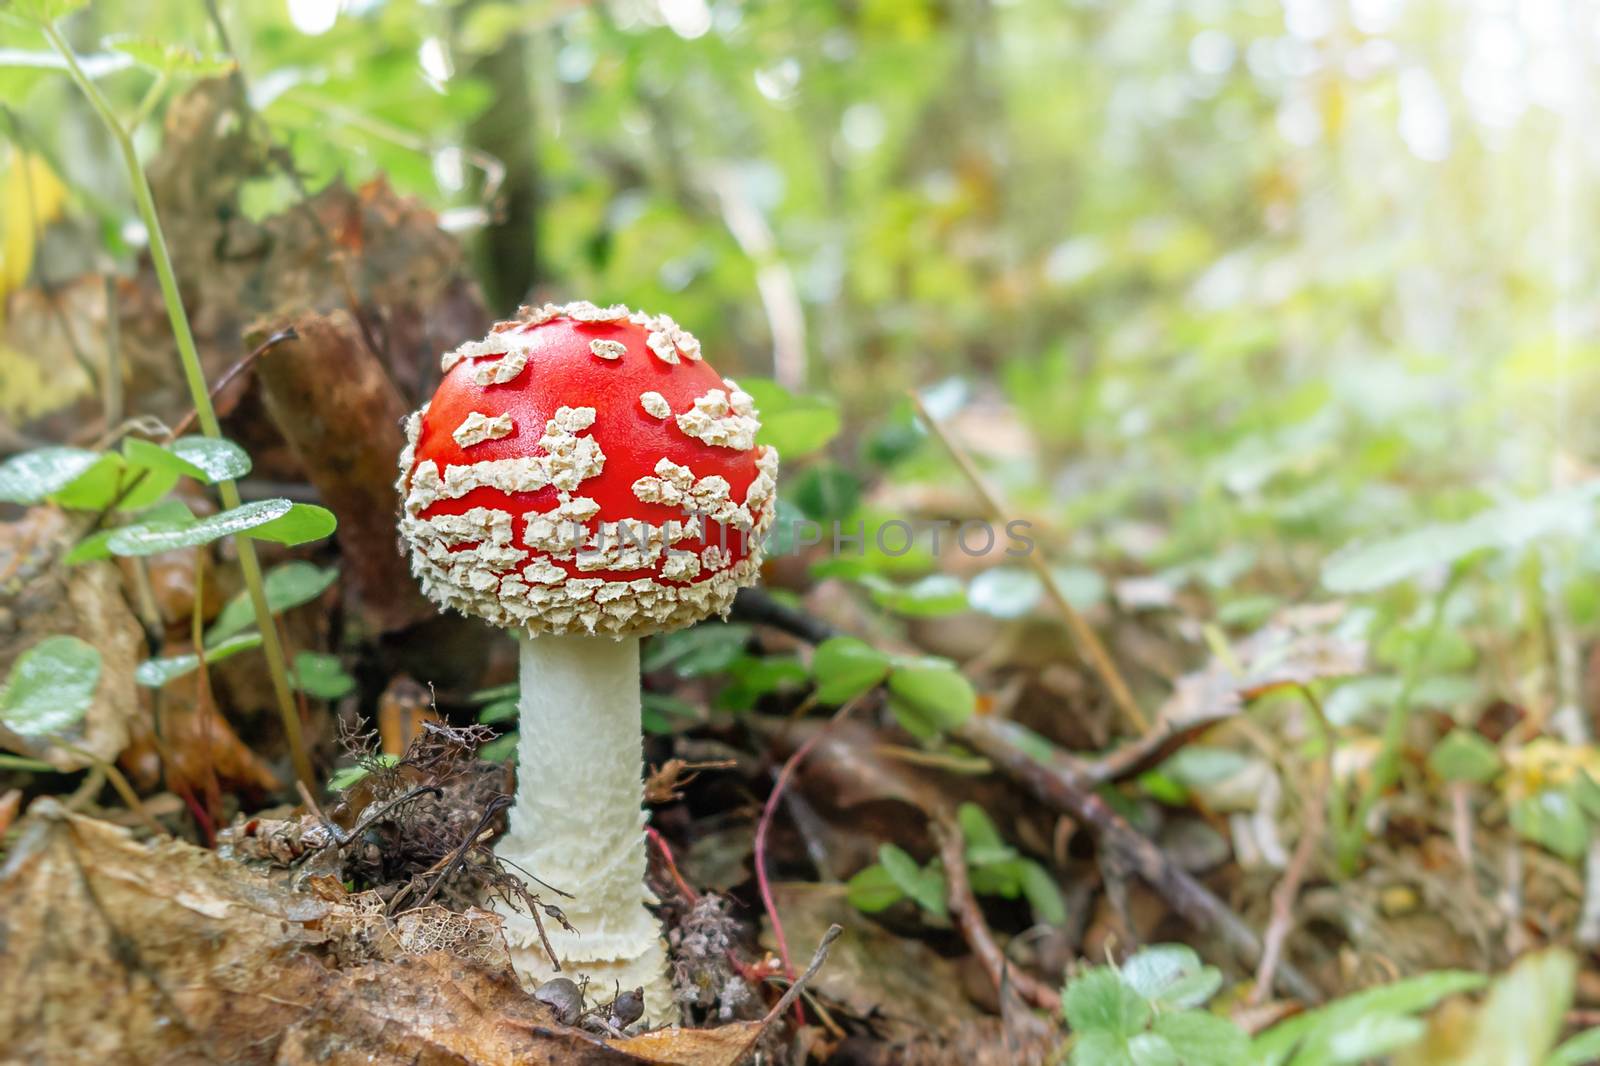 Small mushroom amanita known as fly agaric grows in the forest at sunrise - image by galsand